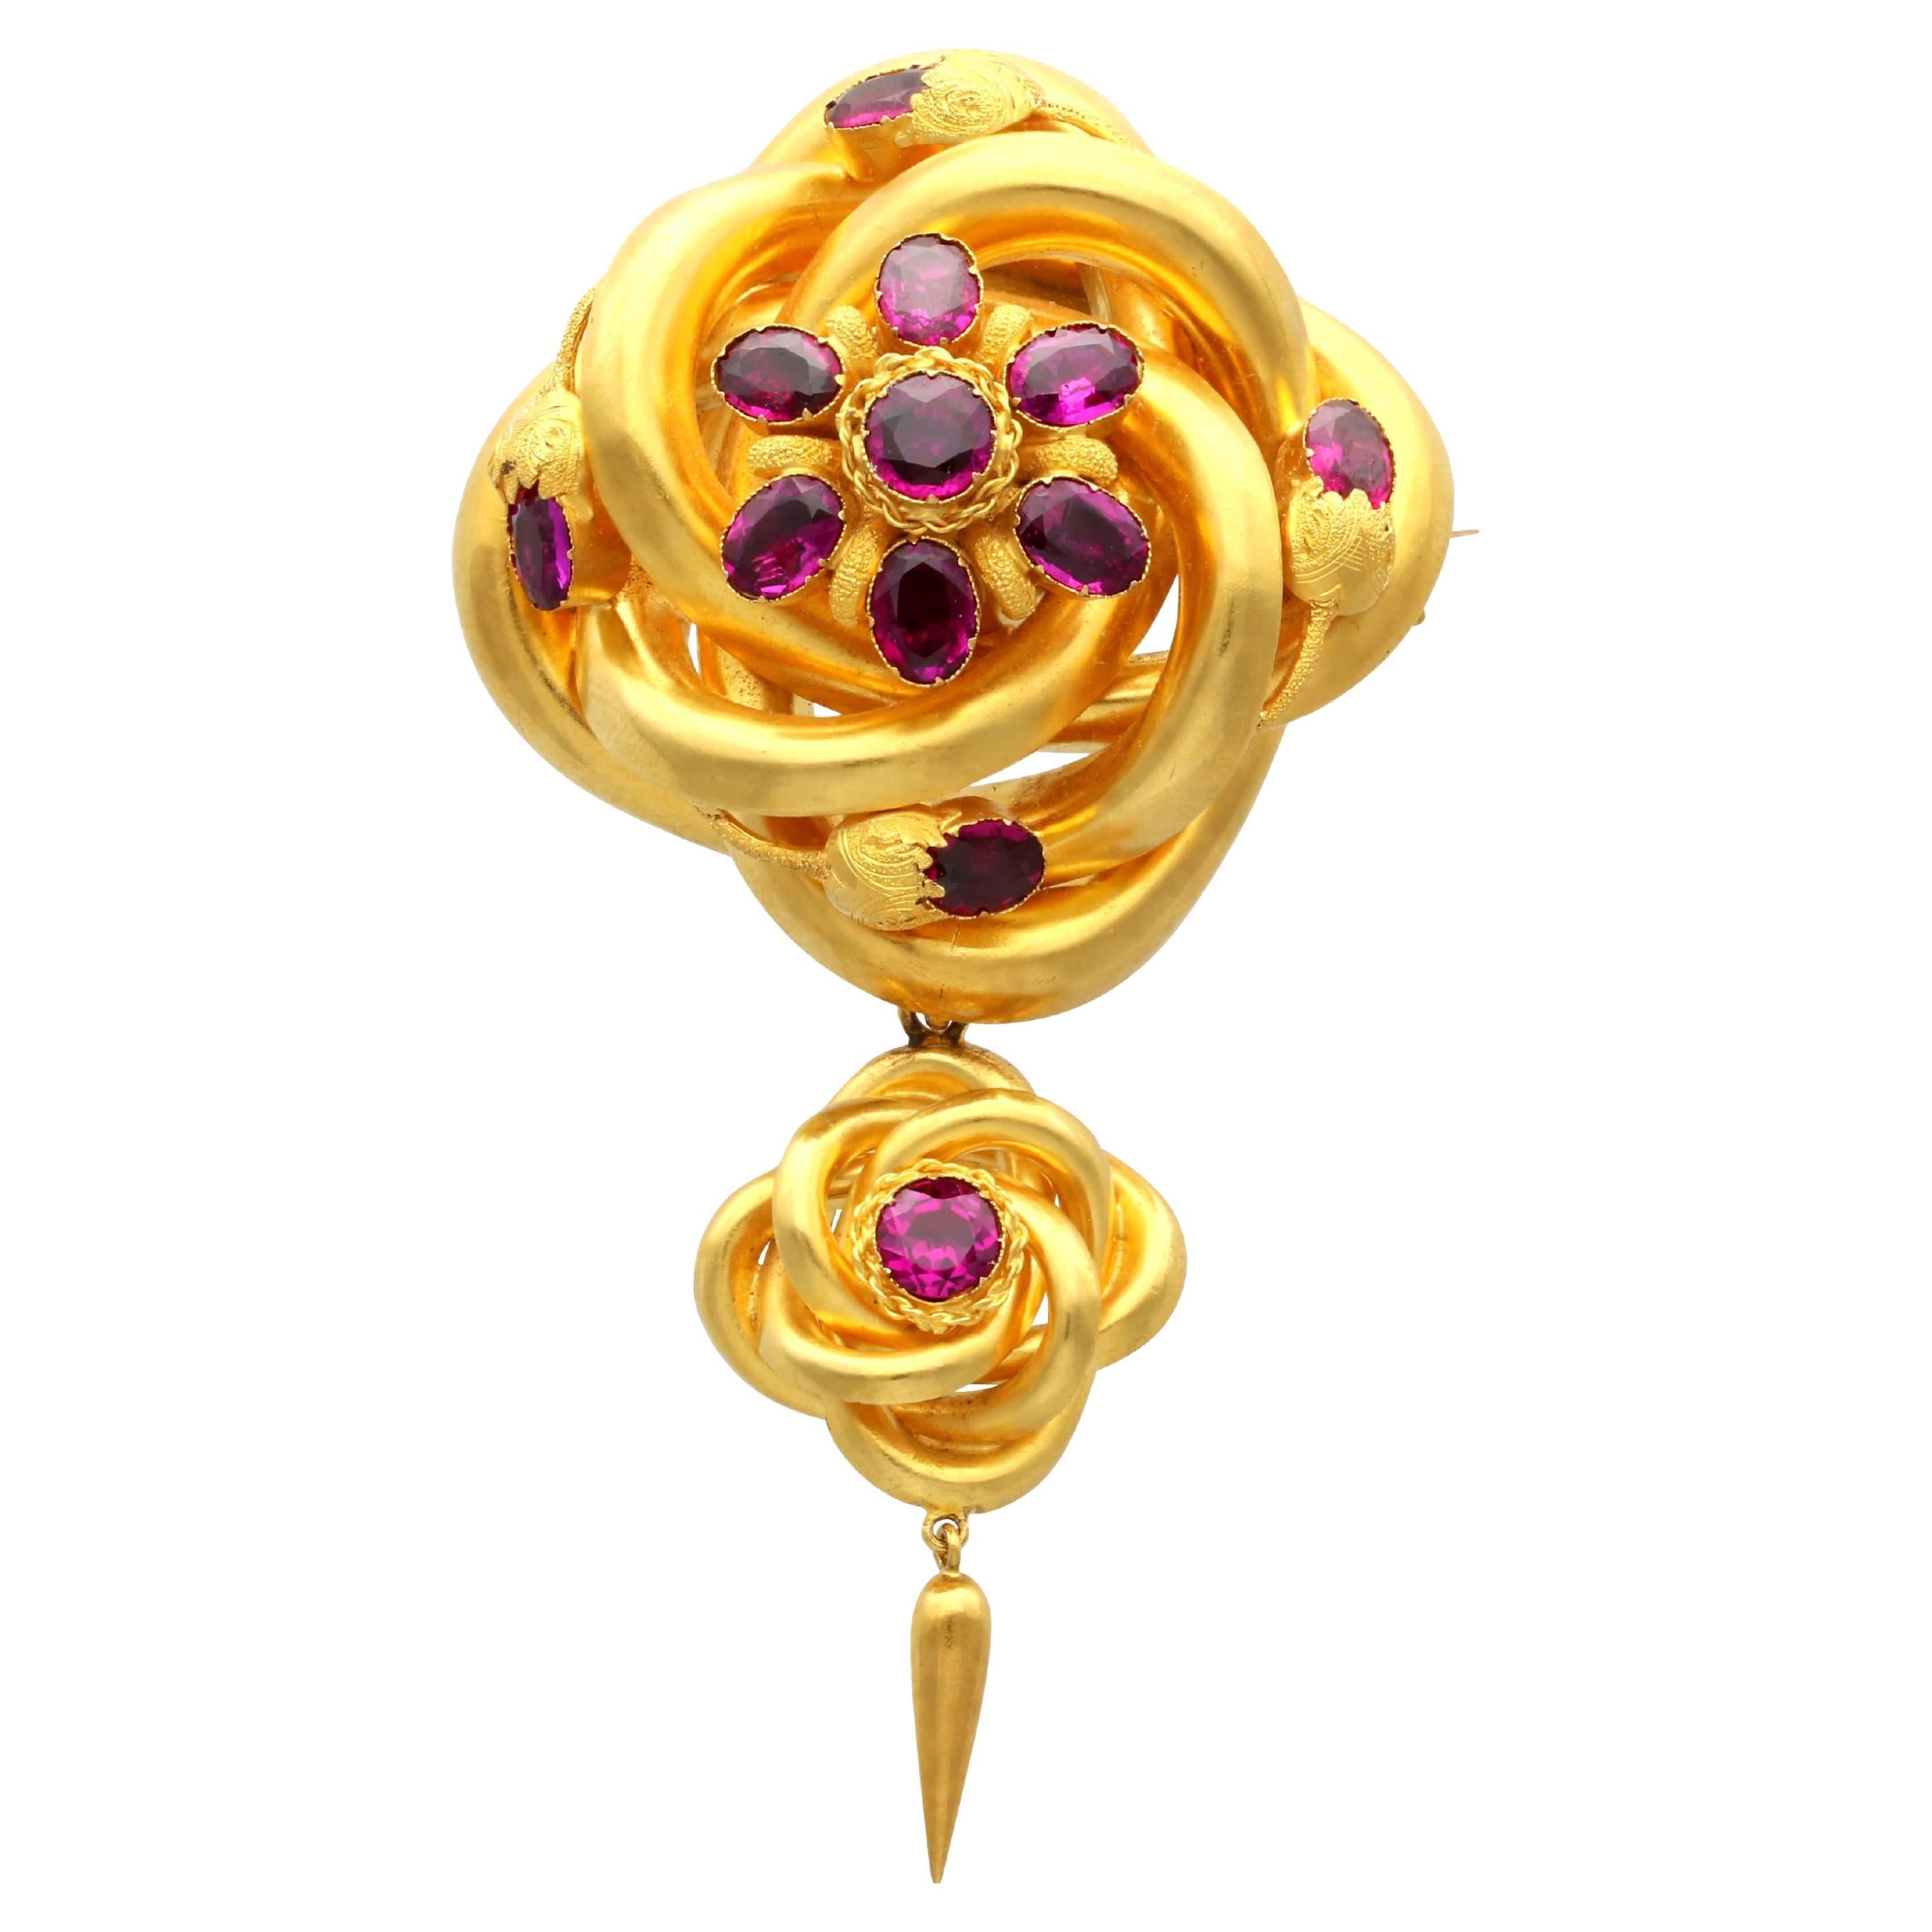 Antique 9.48 Carat Garnet and 21k Yellow Gold Brooch/Pendant For Sale